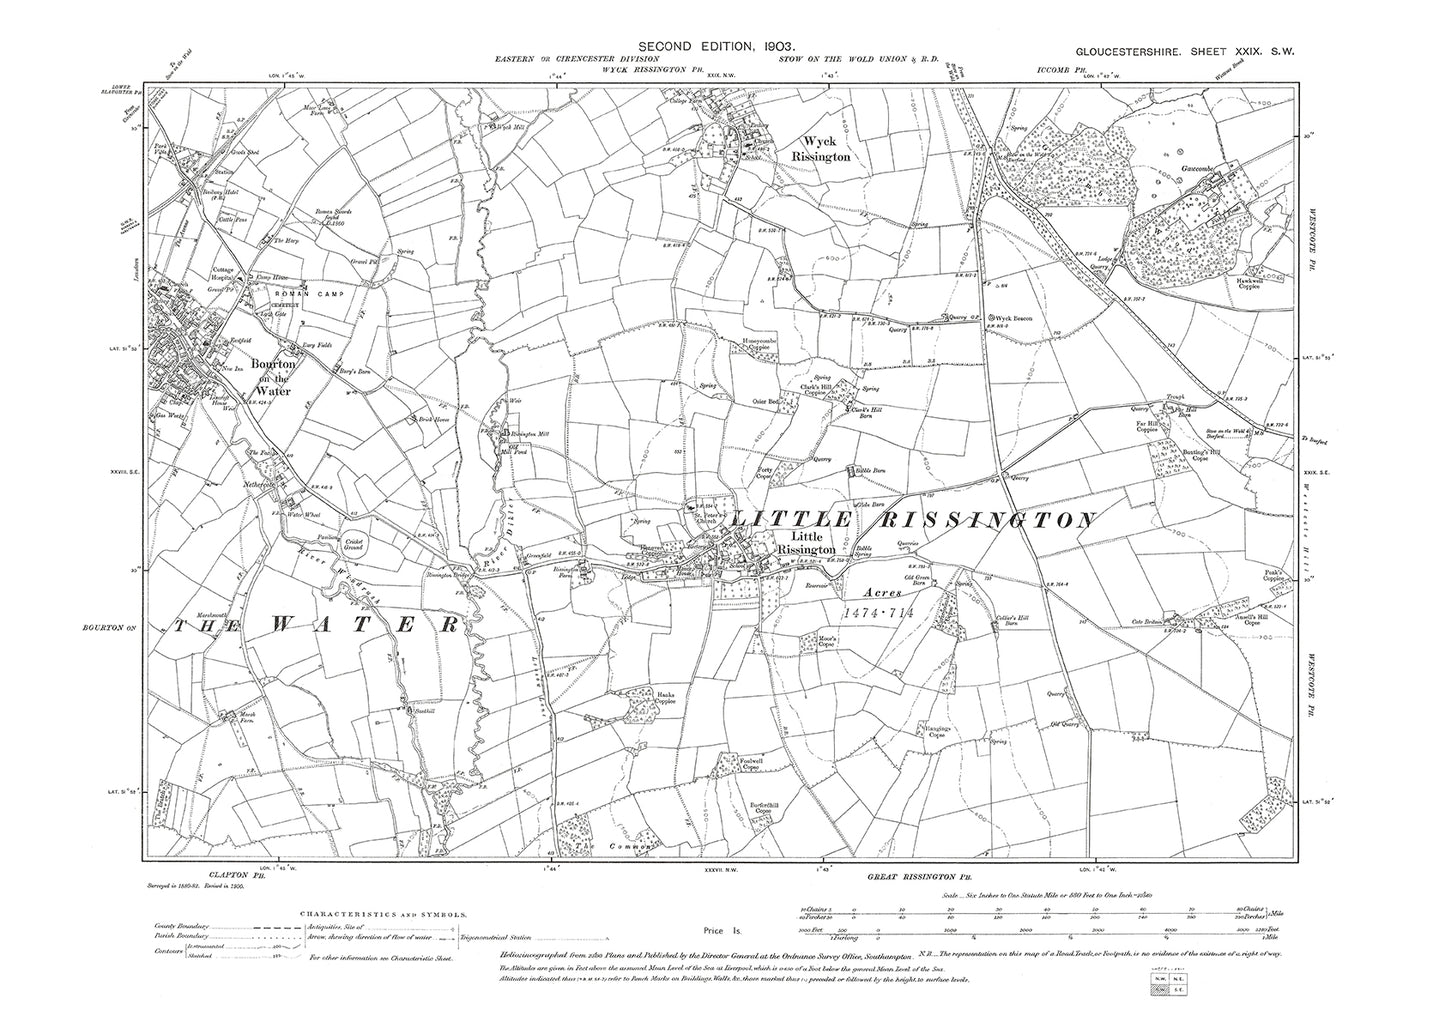 Old OS map dated 1903, showing Bourton on the Water, Wyck Rissington, Little Rissington in Gloucestershire - 29SW